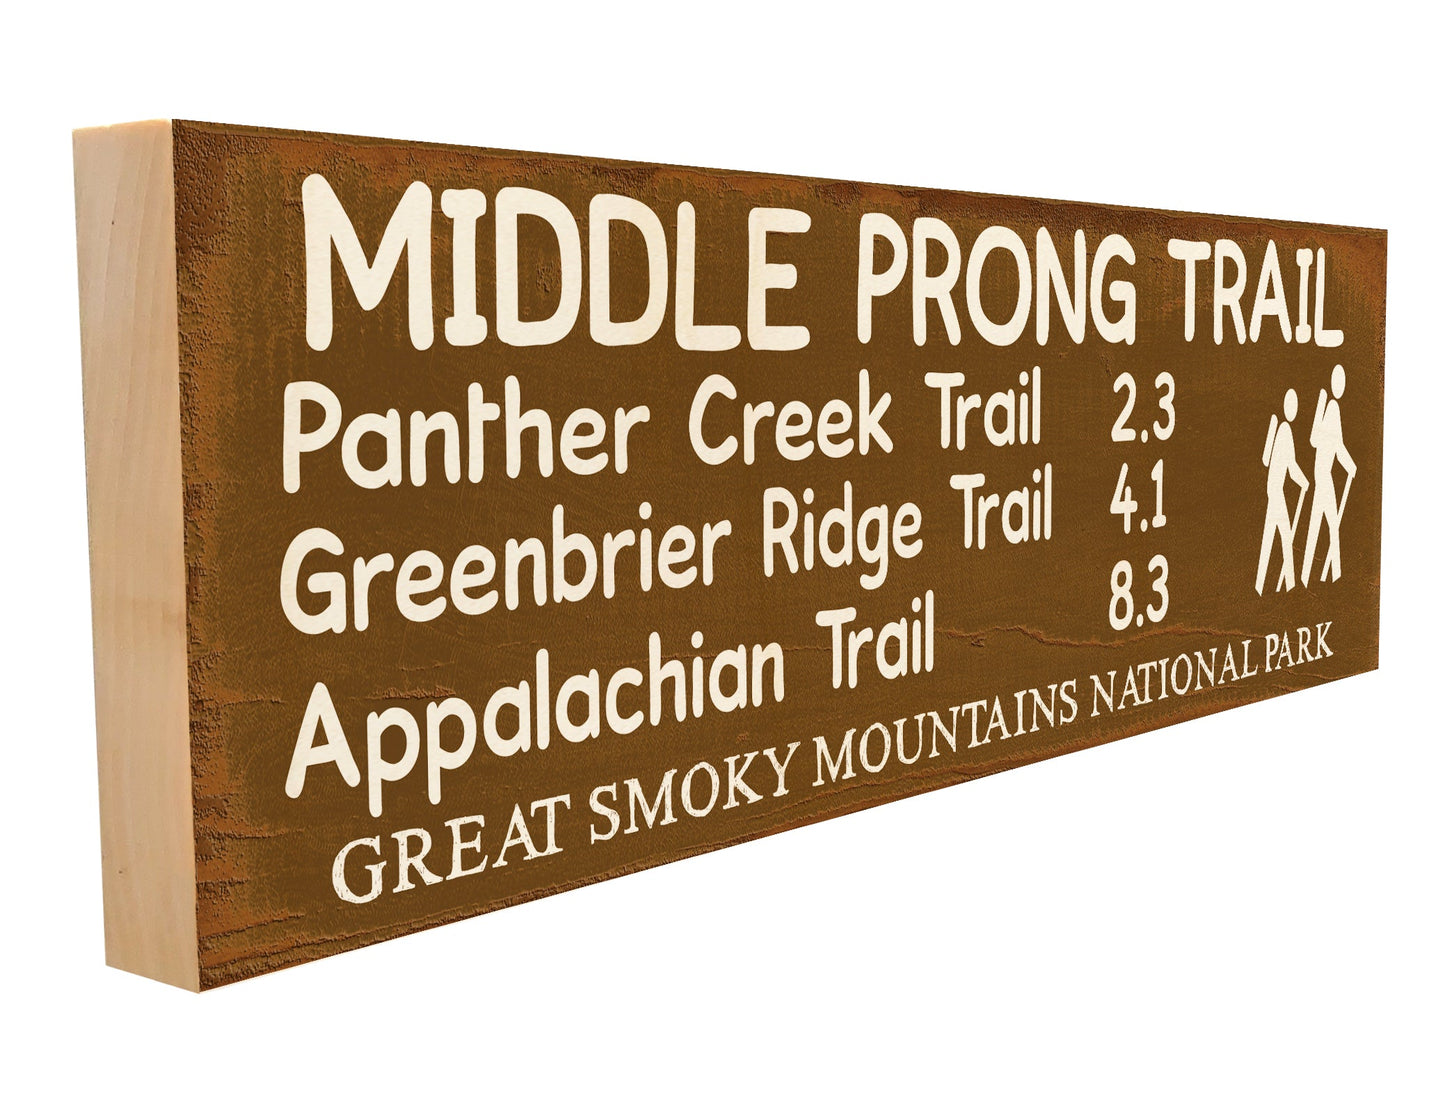 Middle Prong Trail Marker.